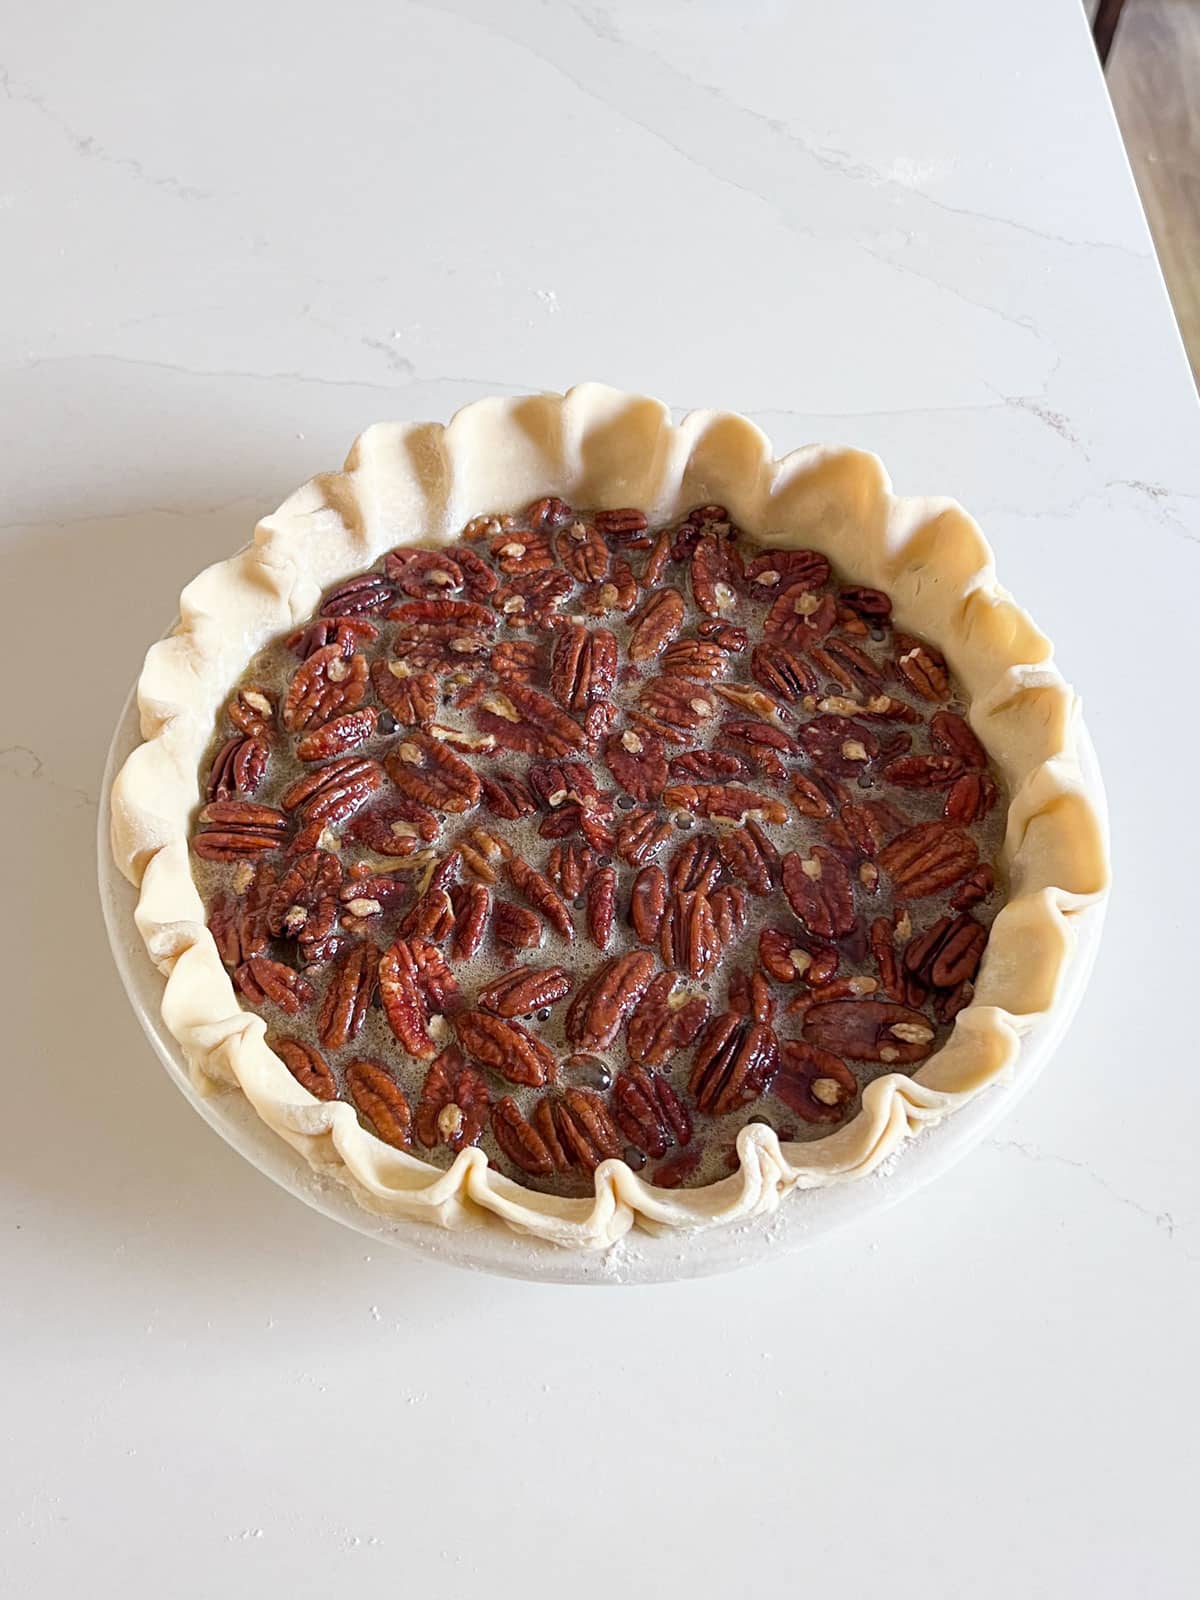 Raw pie crust with pecans and filling in it.